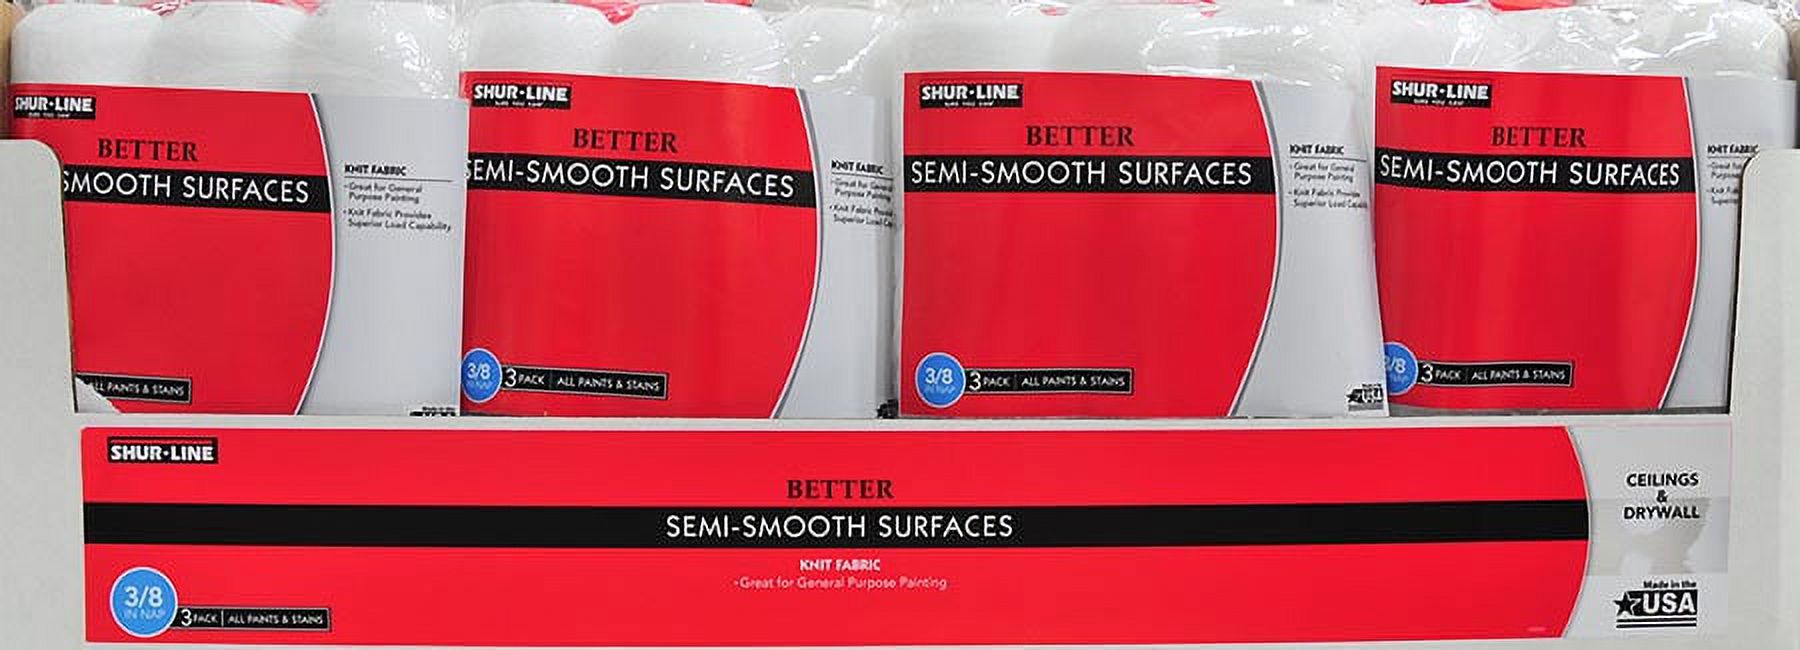 Shur-Line Semi-Smooth Knit 3/8" Roller Covers, 3pk - image 2 of 3